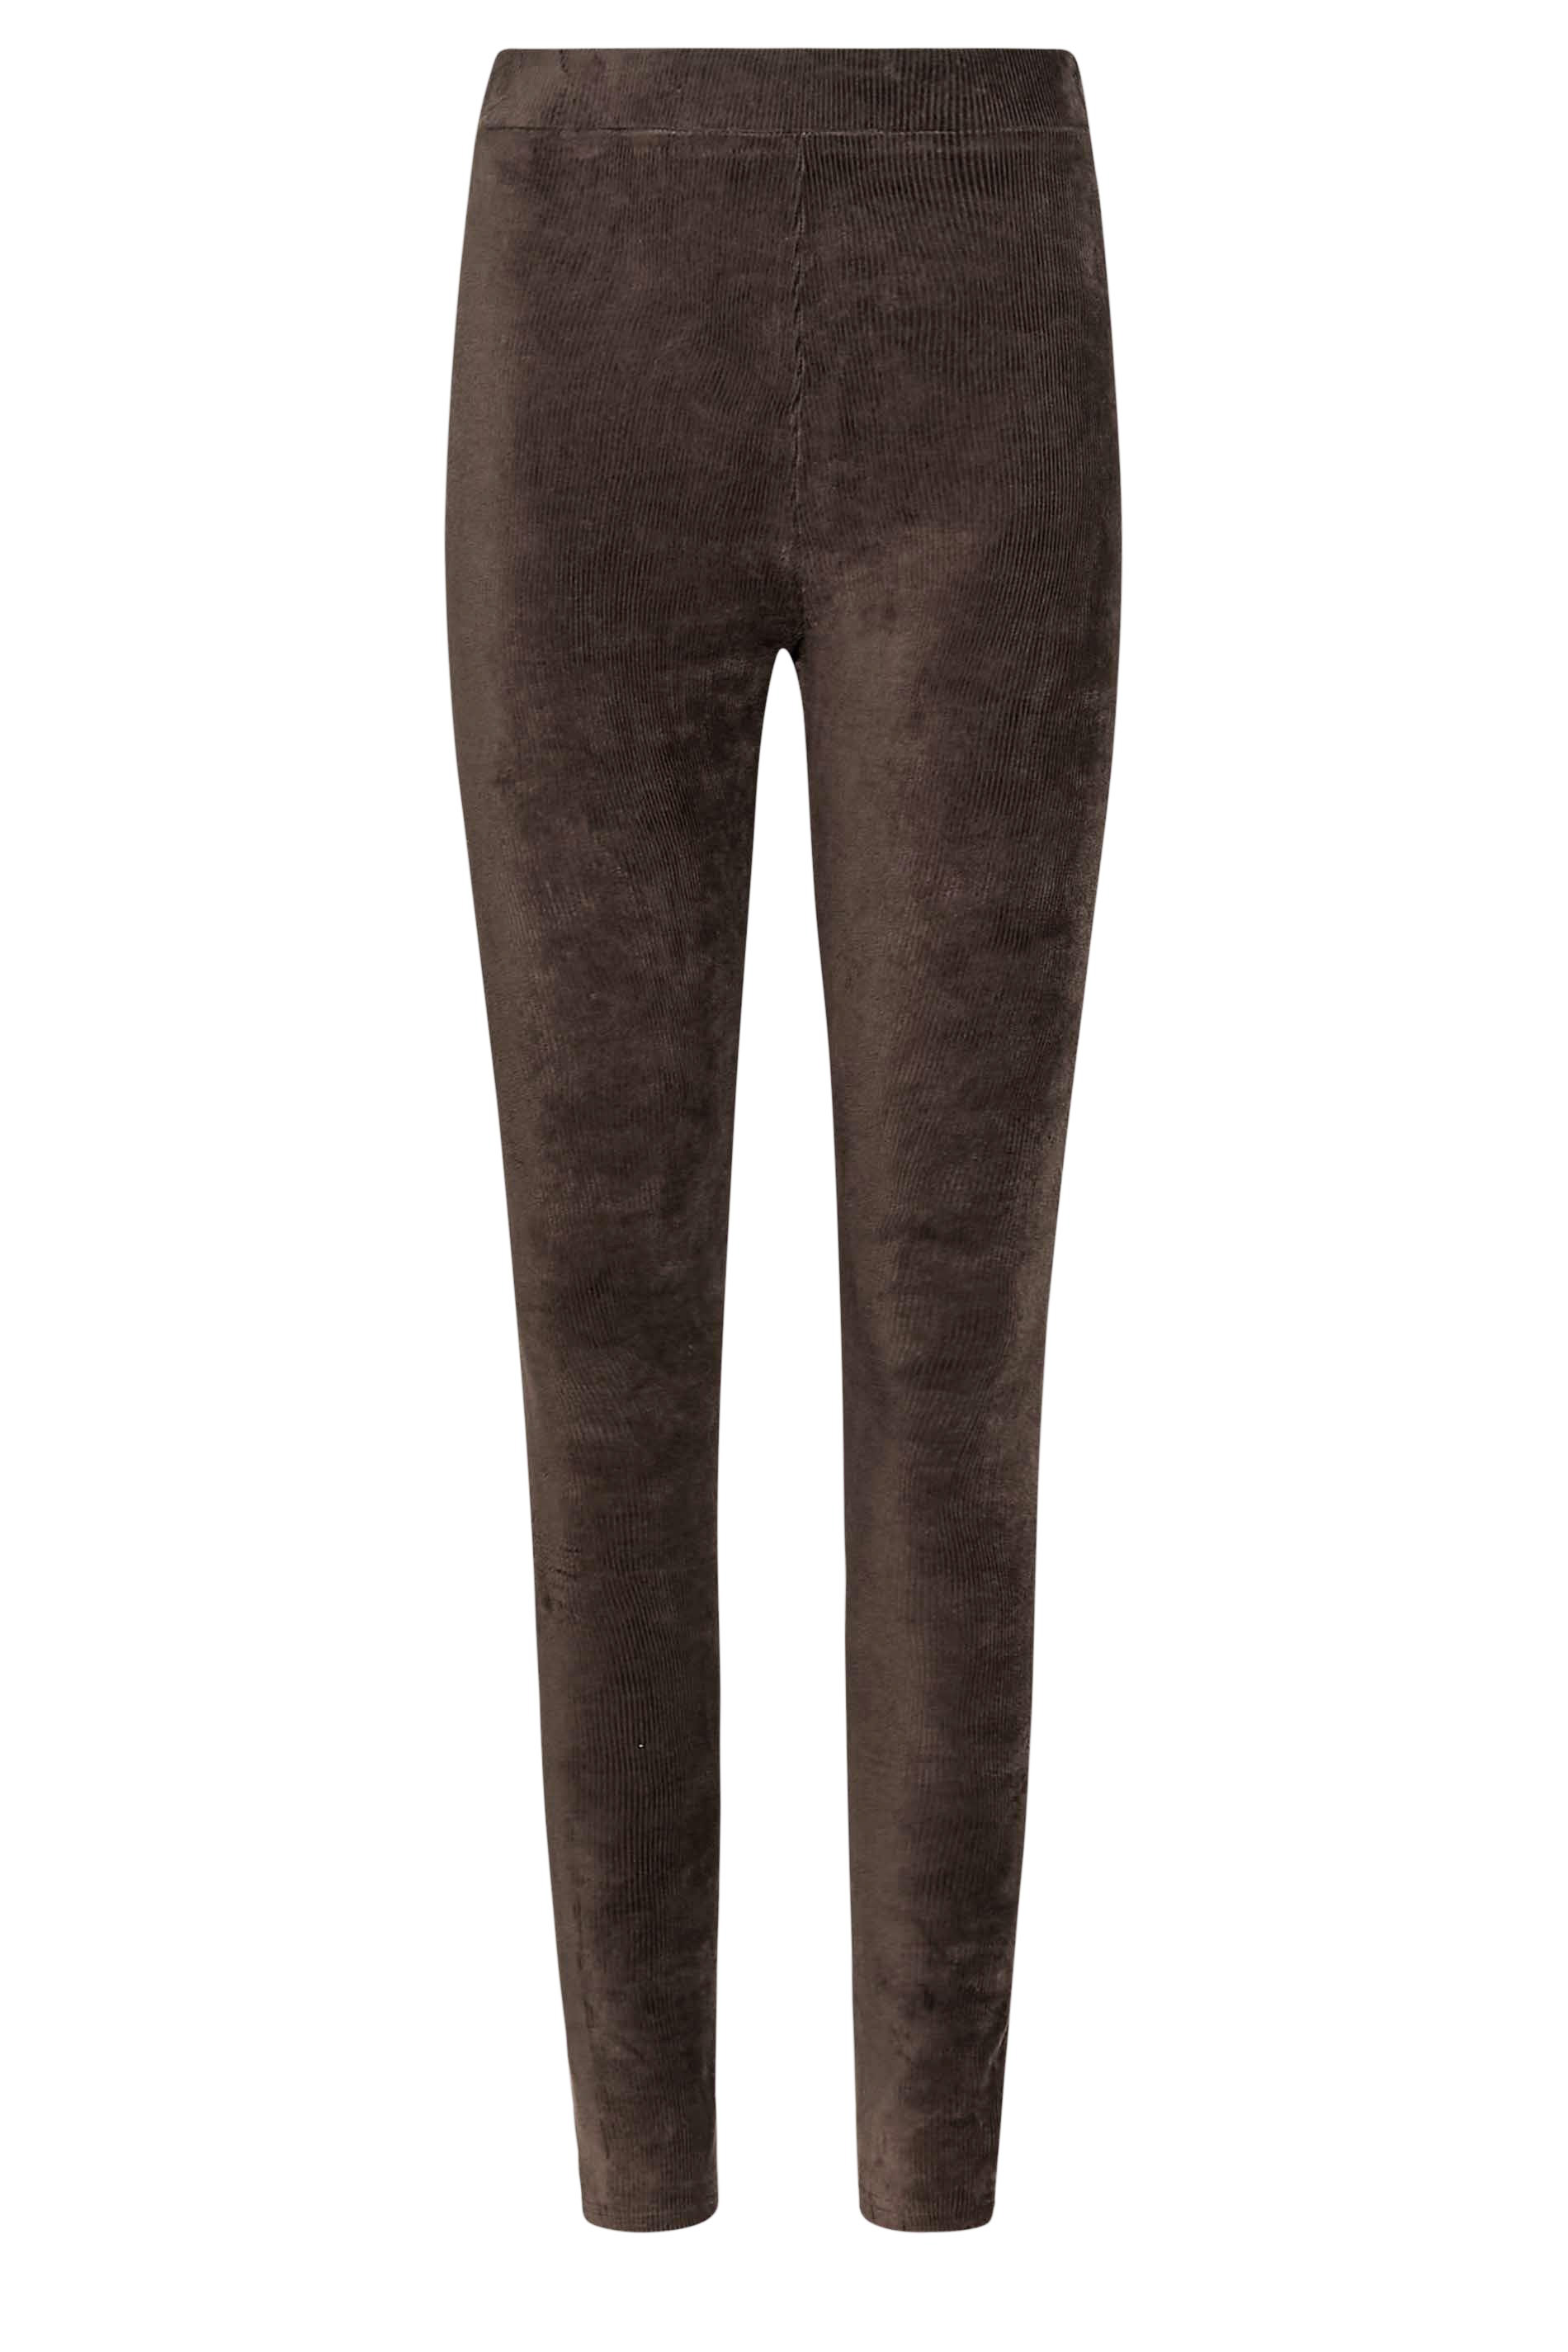 Buy Long Tall Sally Brown Cord Leggings from Next Slovakia